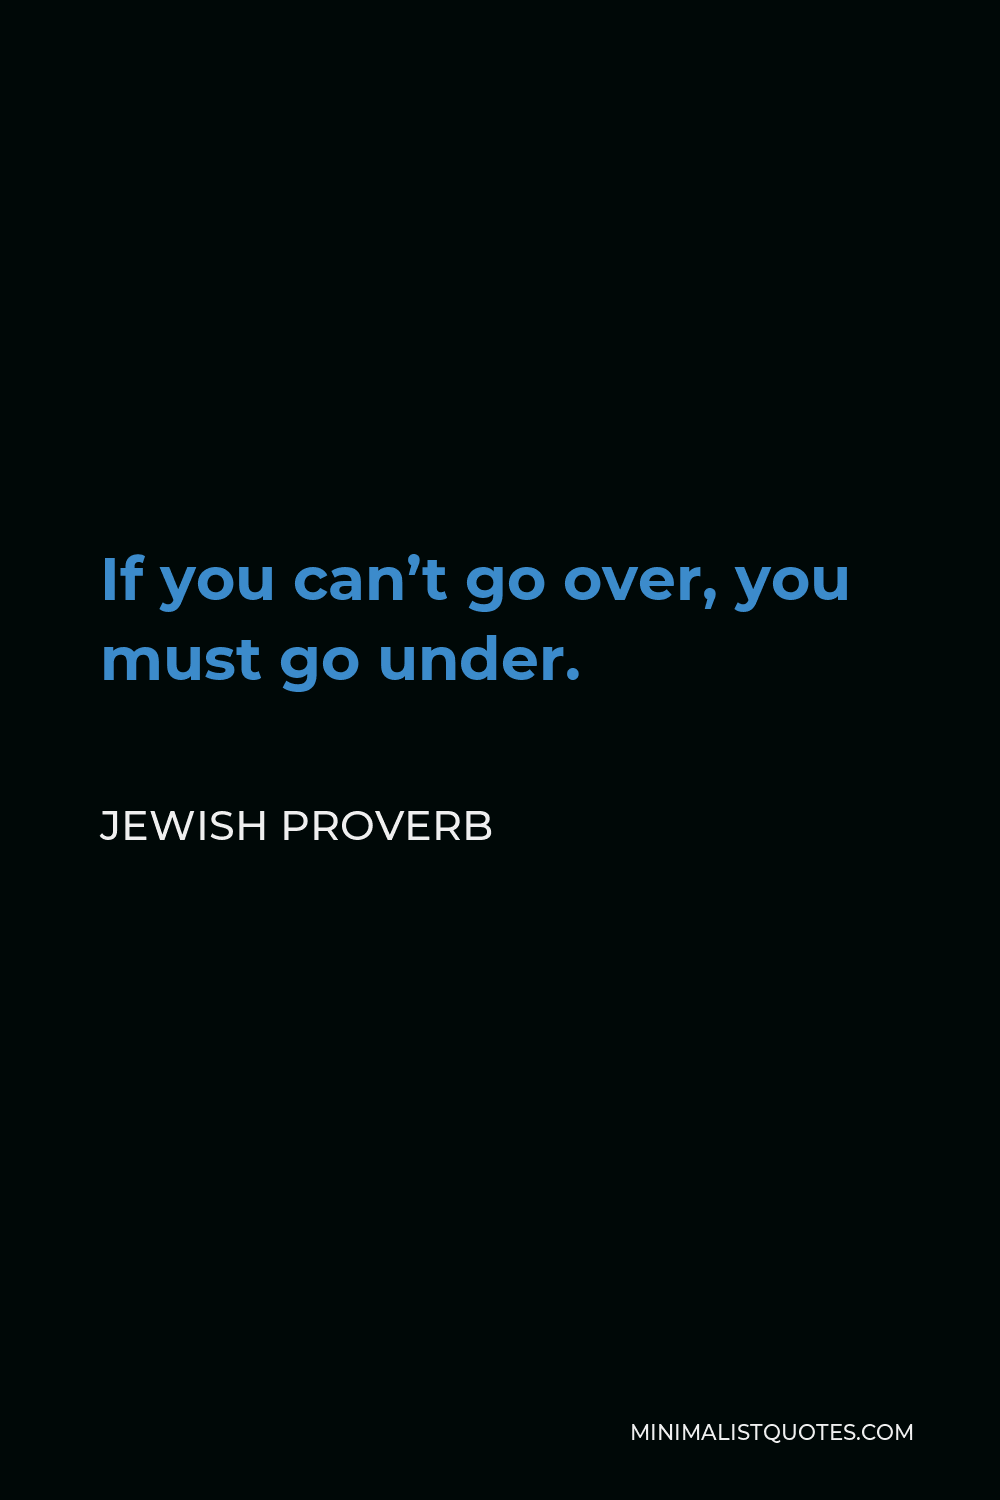 Jewish Proverb Quote - If you can’t go over, you must go under.